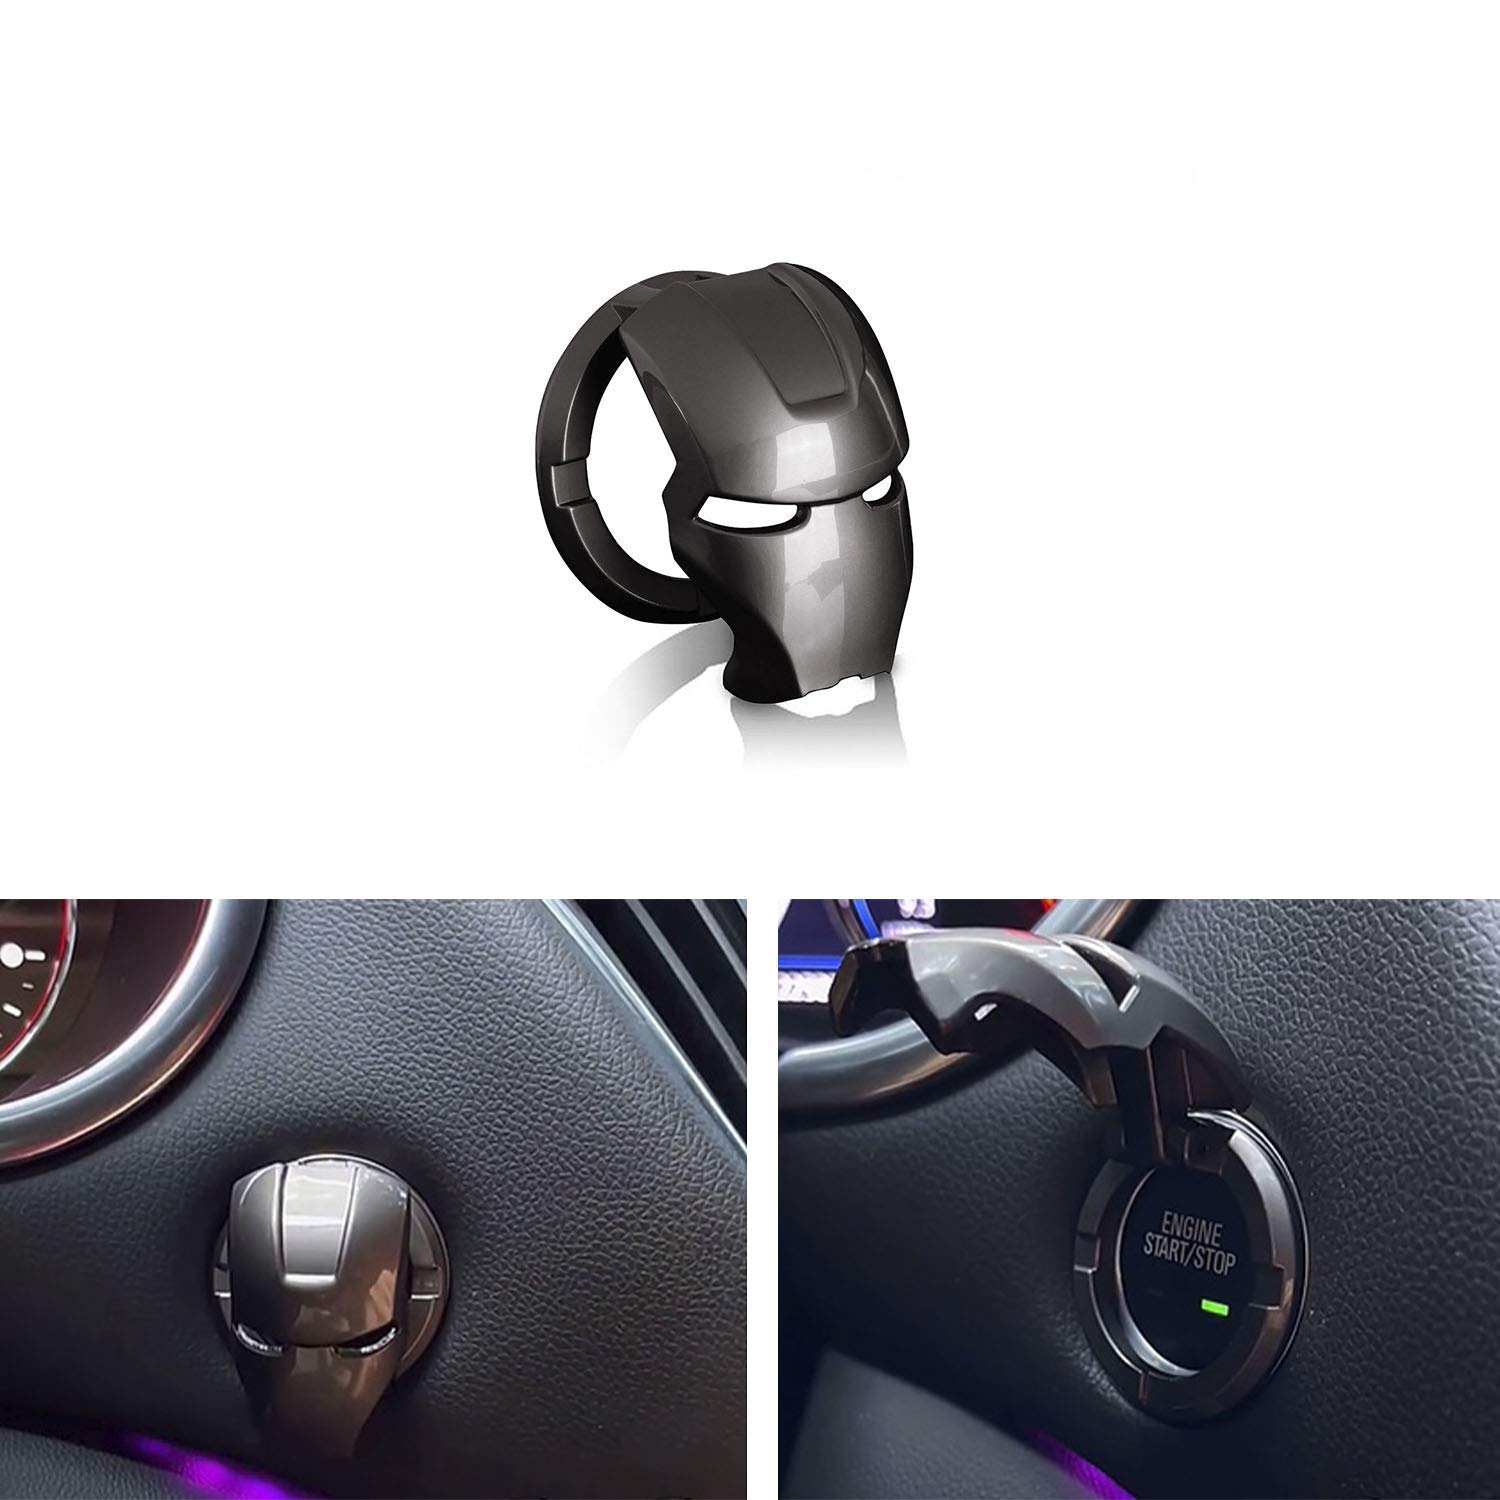 Zinc Alloy One-Key Start Cover Motorcycles Car Engine Start Stop Button Cover Which Can Be Used for Cars Black Open Anti-Scratch Car Ignition Button Protection Cover Etc.